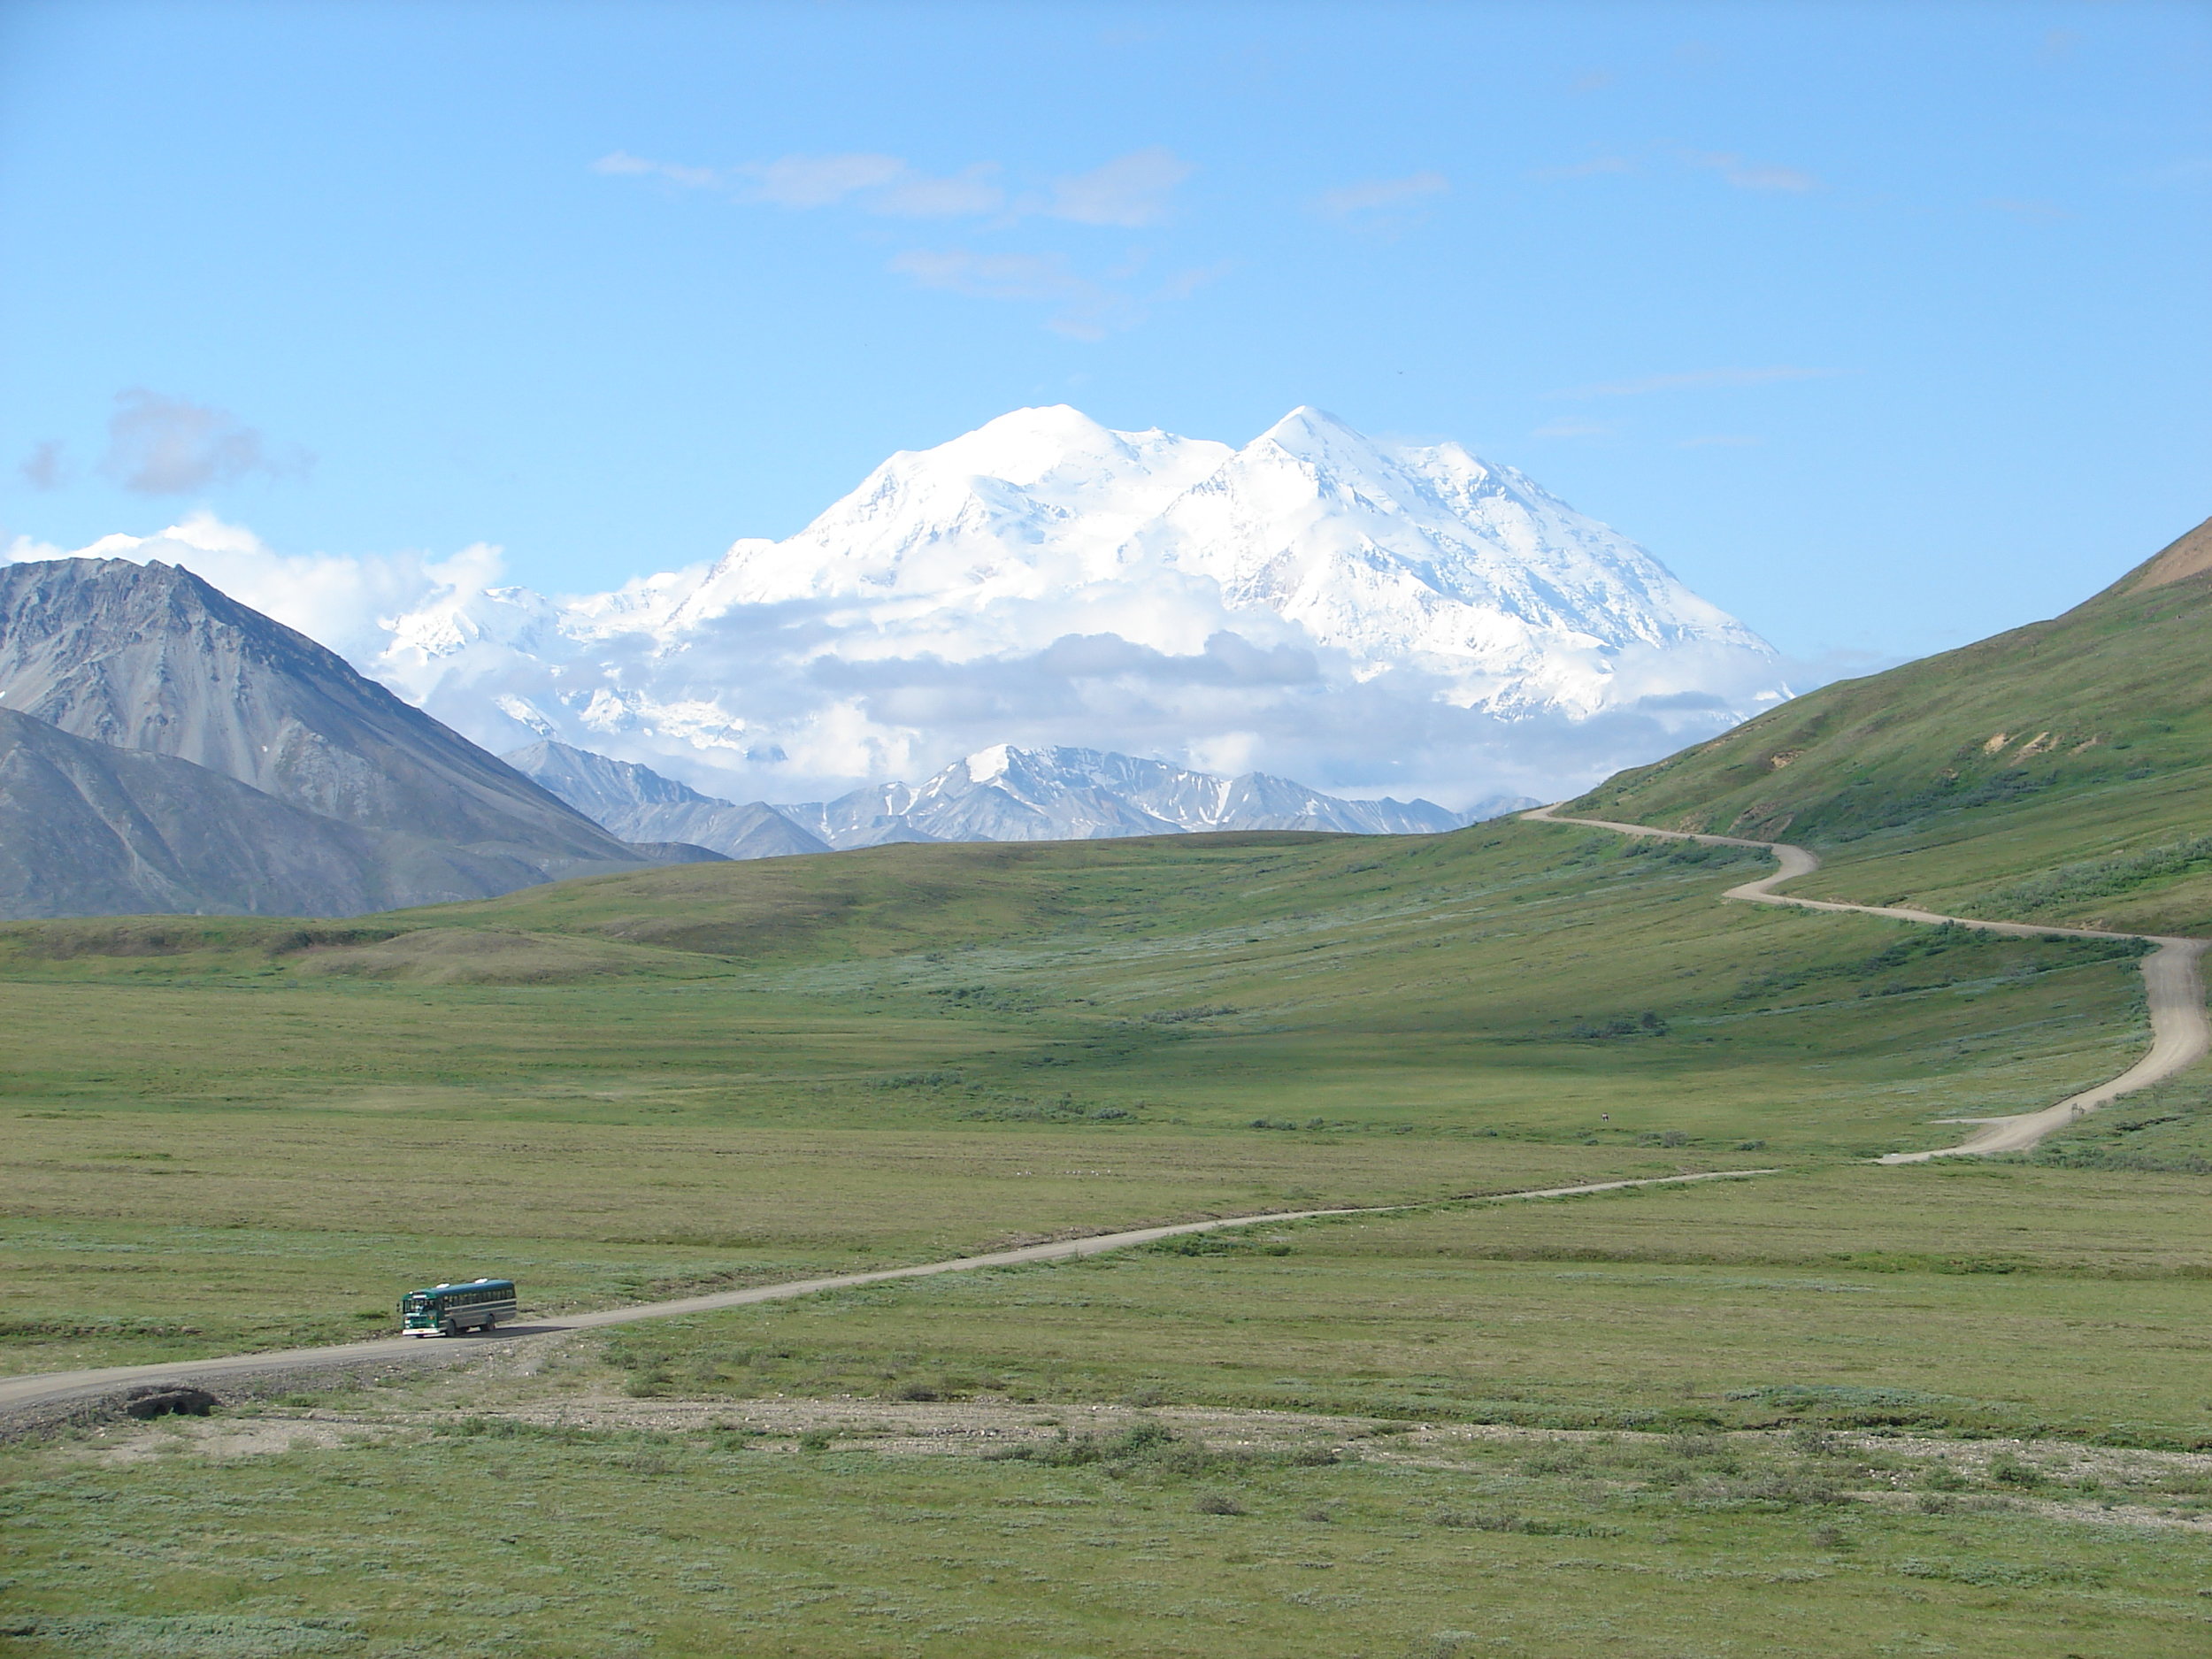 The Denali Park Road runs 92 miles into the park, and buses will drop off and pick up hikers nearly anywhere along its path.